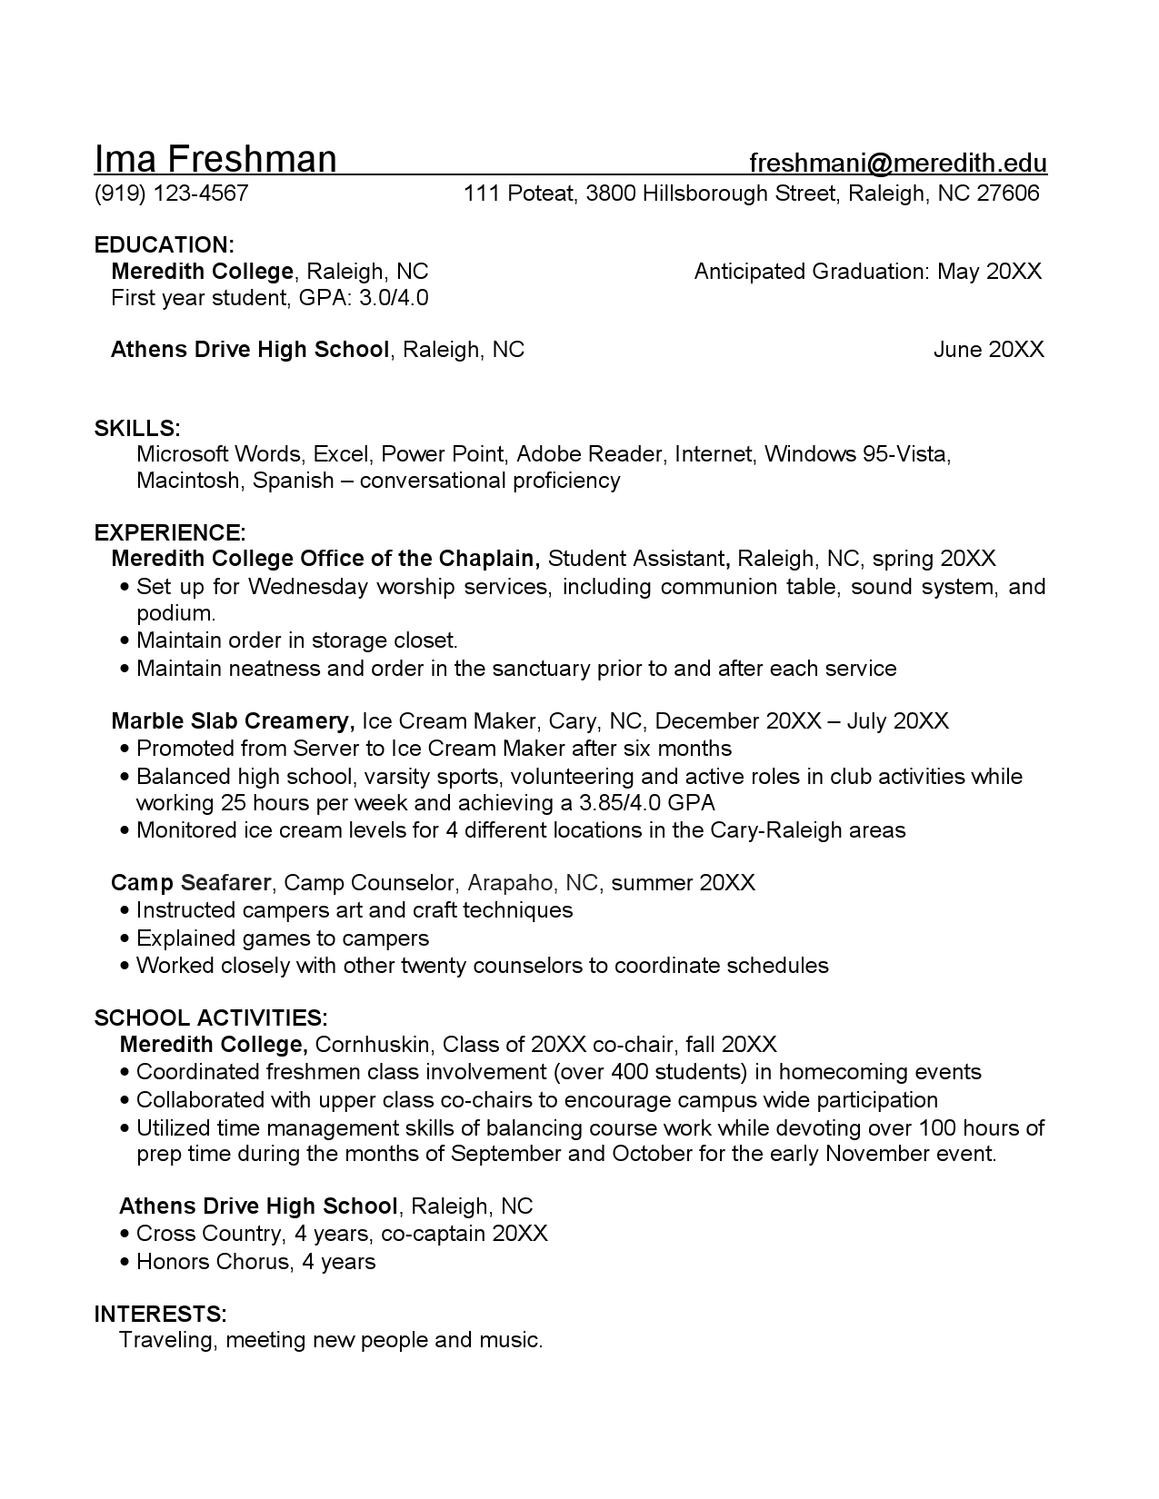 First Year College Student Resume Template Freshman Resume Sample by Meredith College Academic & Career …